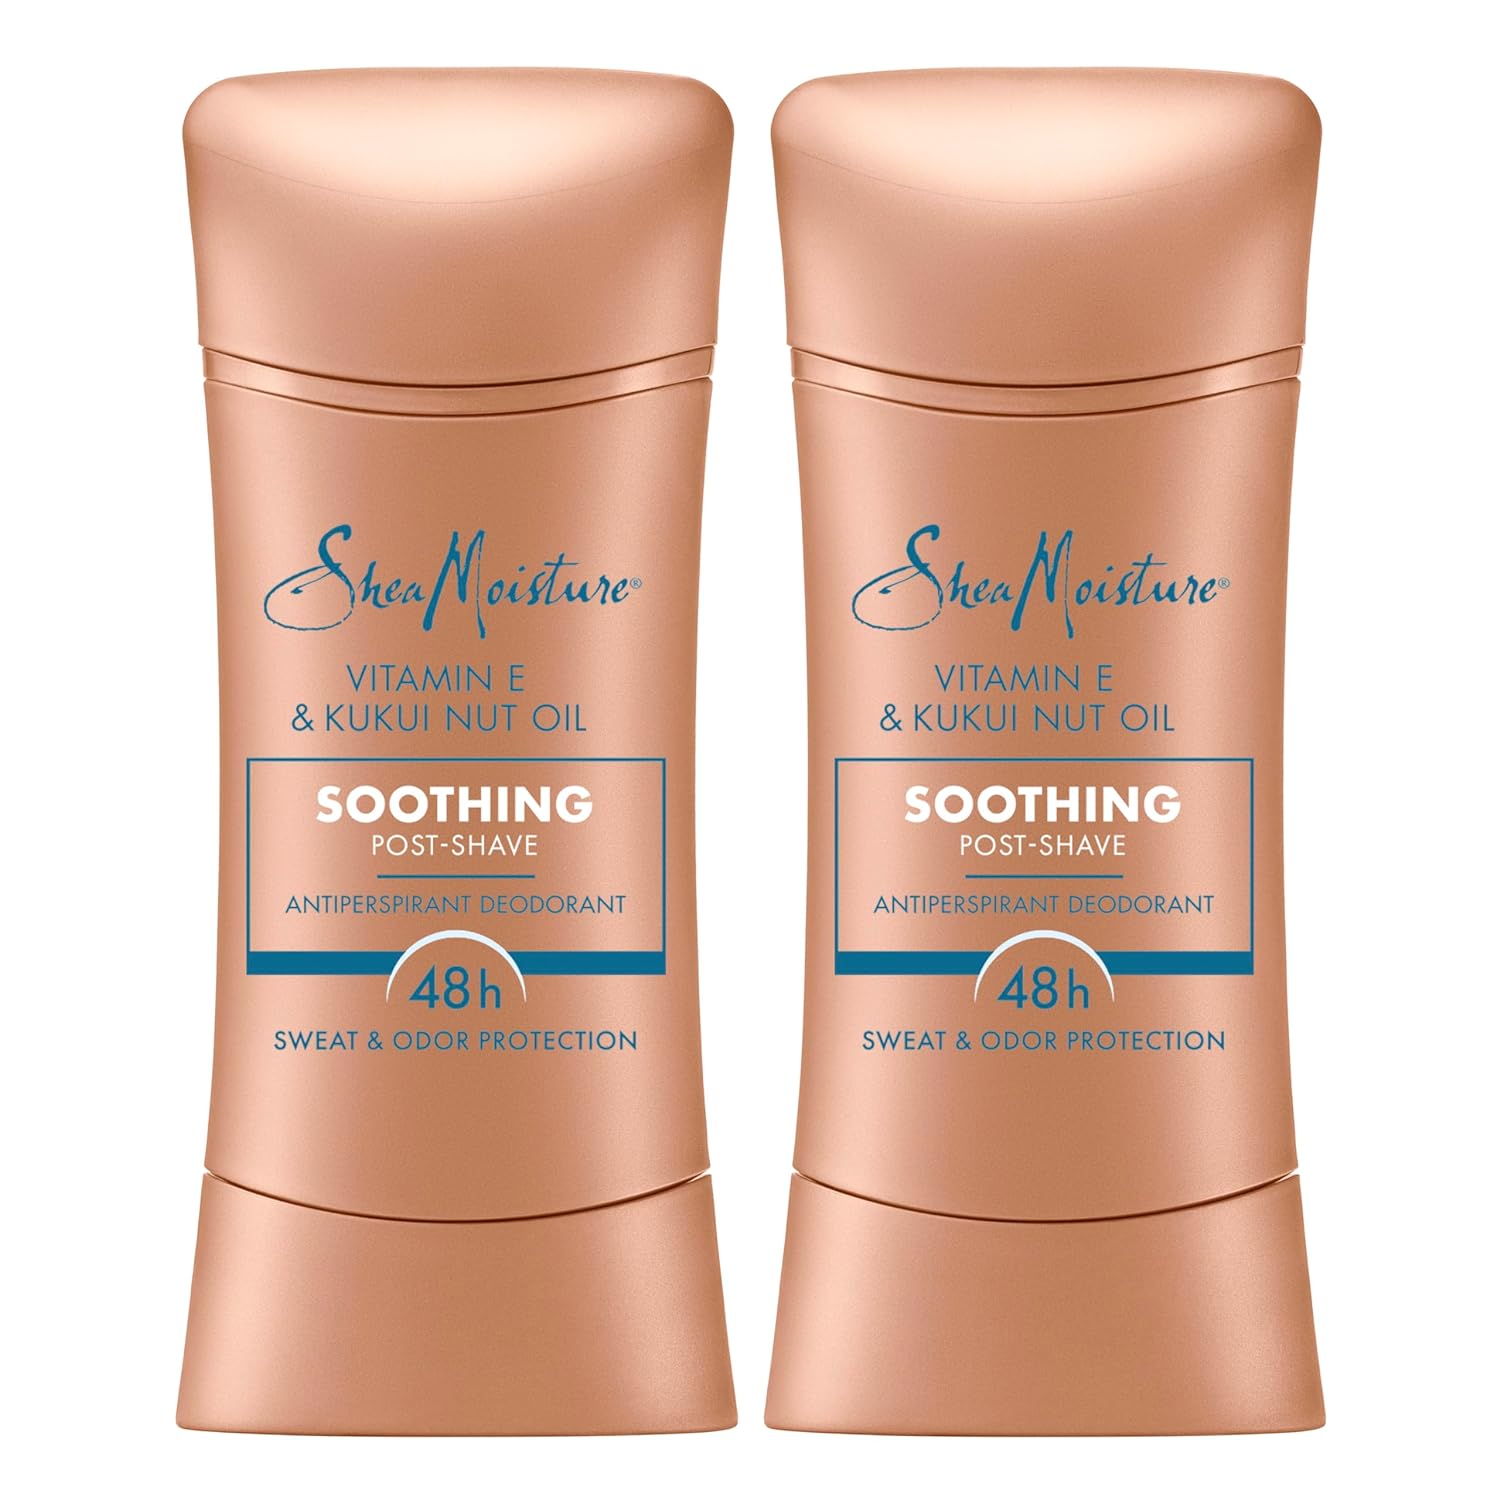 Shea Moisture Antiperspirant Deodorant Stick Soothing Vitamin E & Kukui Nut Oil, 2 count for 48HR Sweat & Odor Protection with No Parabens & No Mineral Oil 2.6 oz